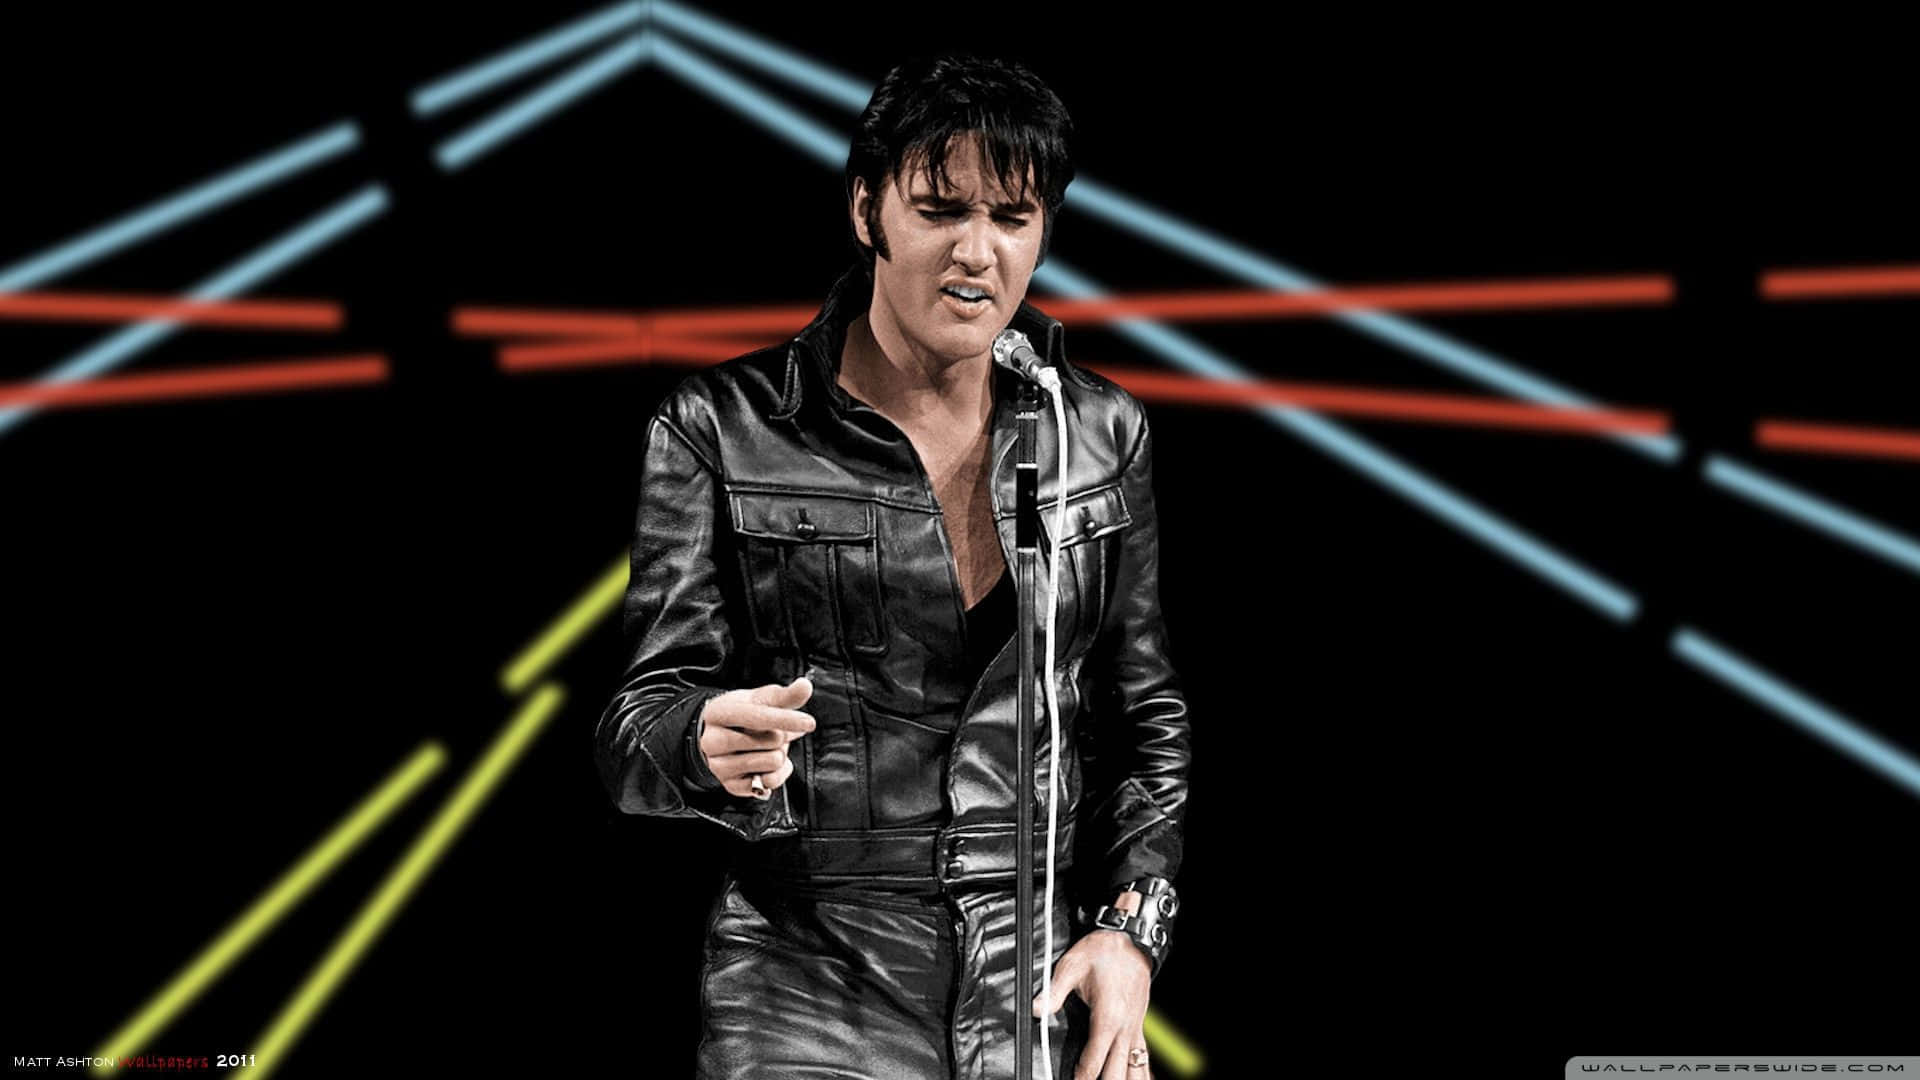 Elvis Presley In Leather Jacket And A Microphone Wallpaper